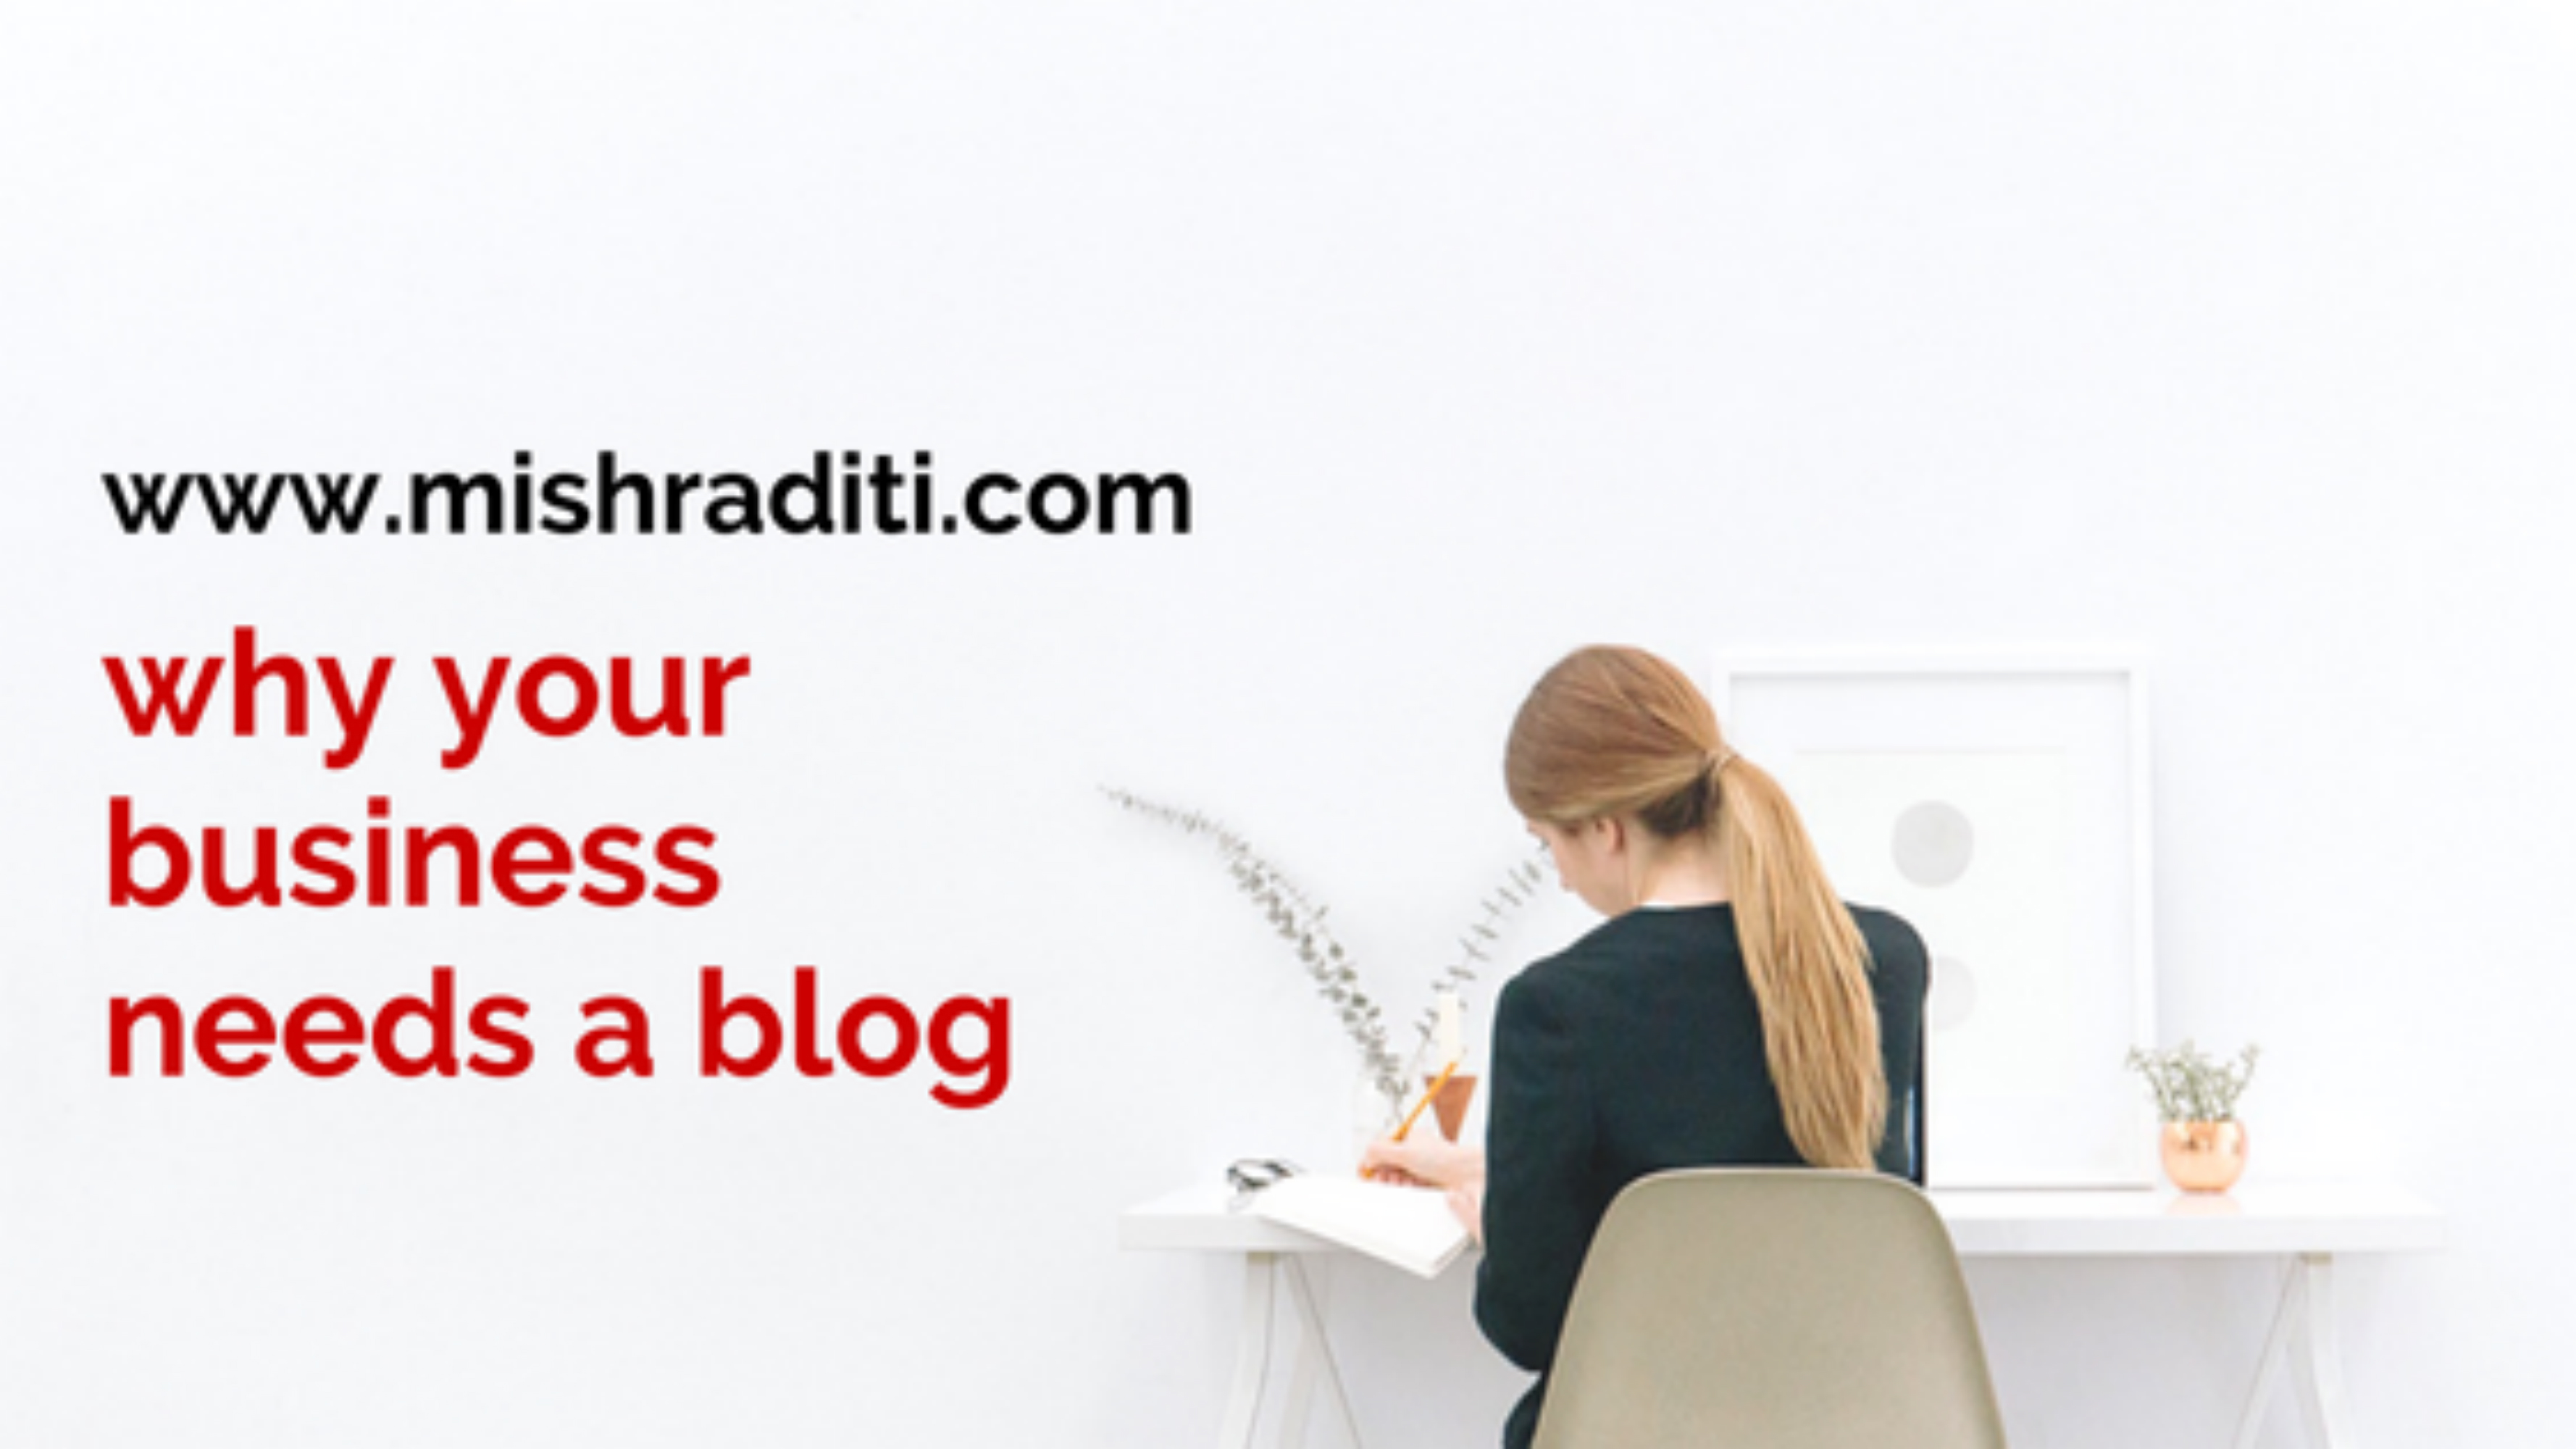 You Need to Know Why Your Business Needs a Blog